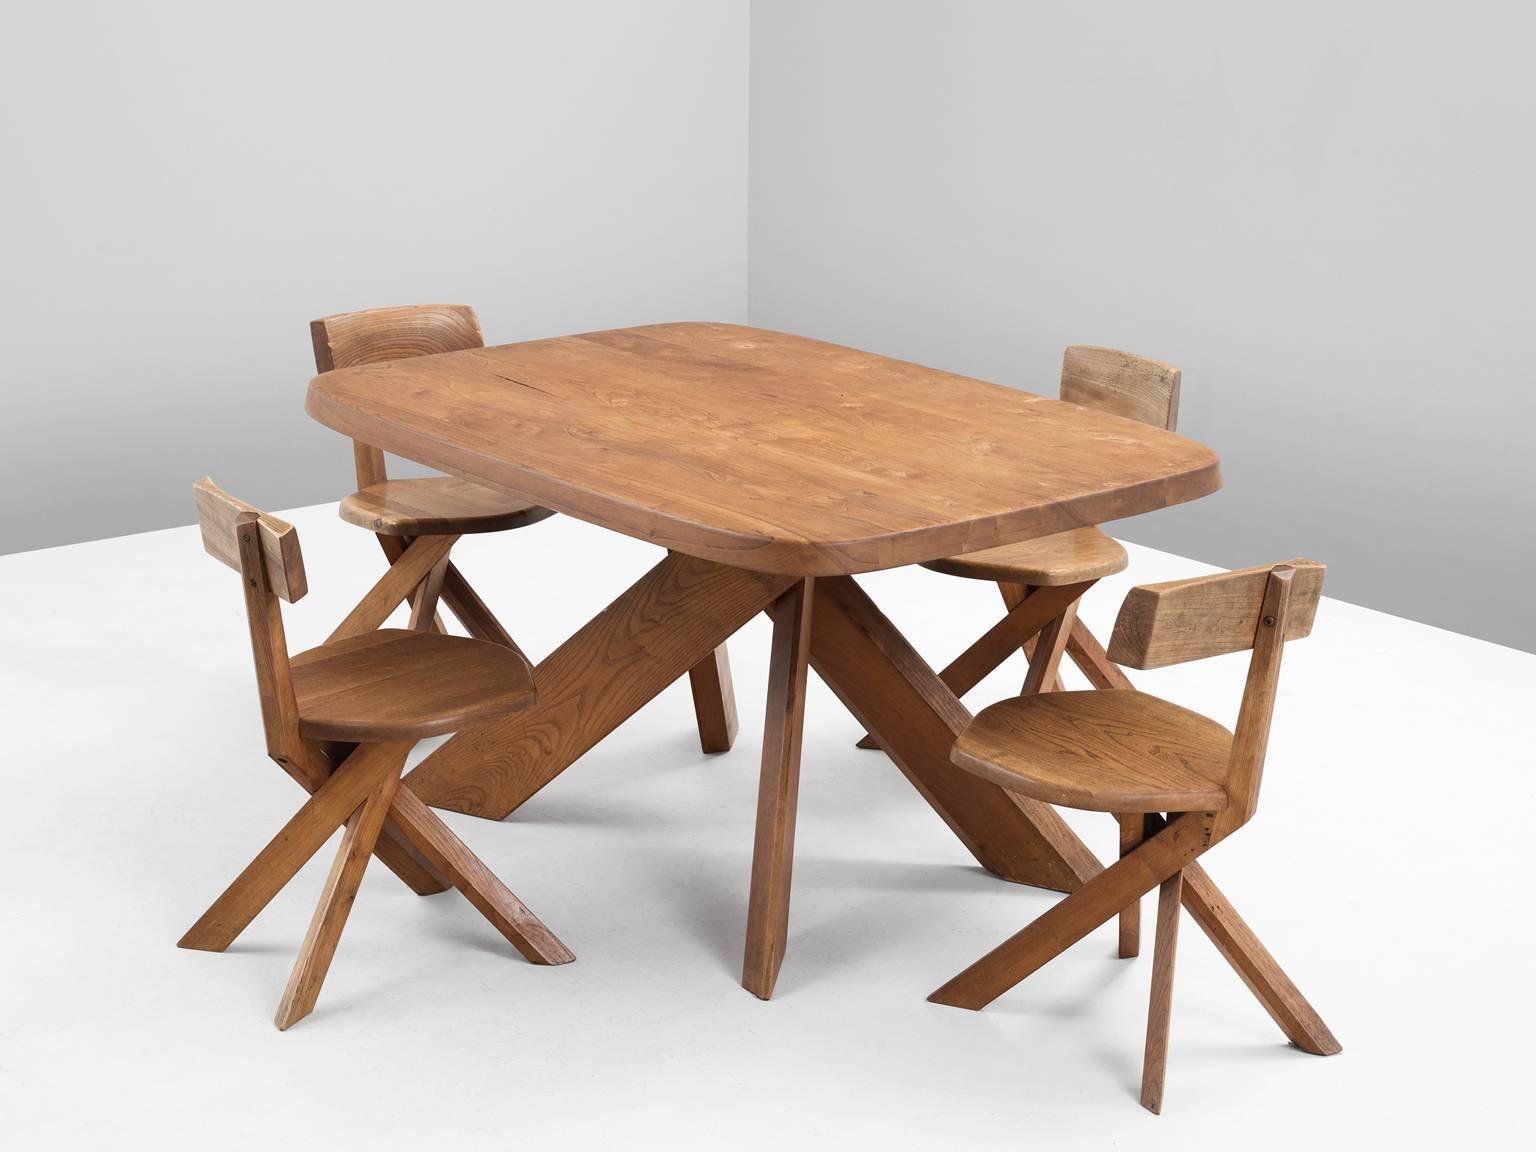 Dining table T35B and four chairs S34, in elm by Pierre Chapo, France, 1960s.

Small dining table and four chairs in solid elm by master woodworker Pierre Chapo. The basic design and construction, as well as the use of solid pine wood